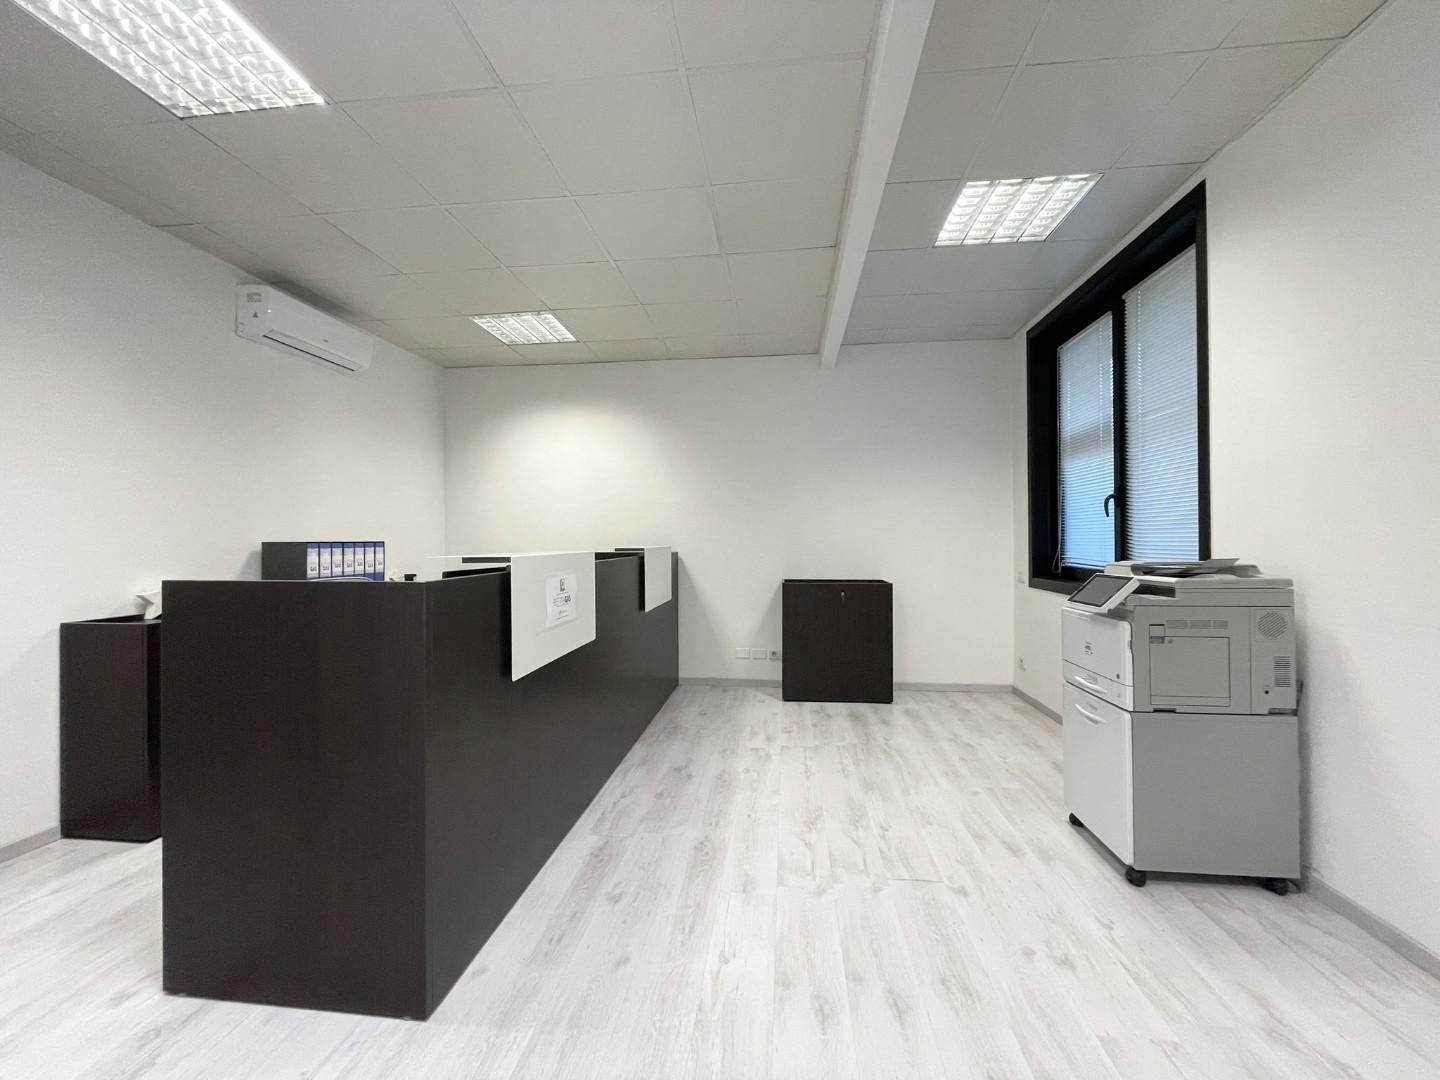 Office for commercial rentals in Siena